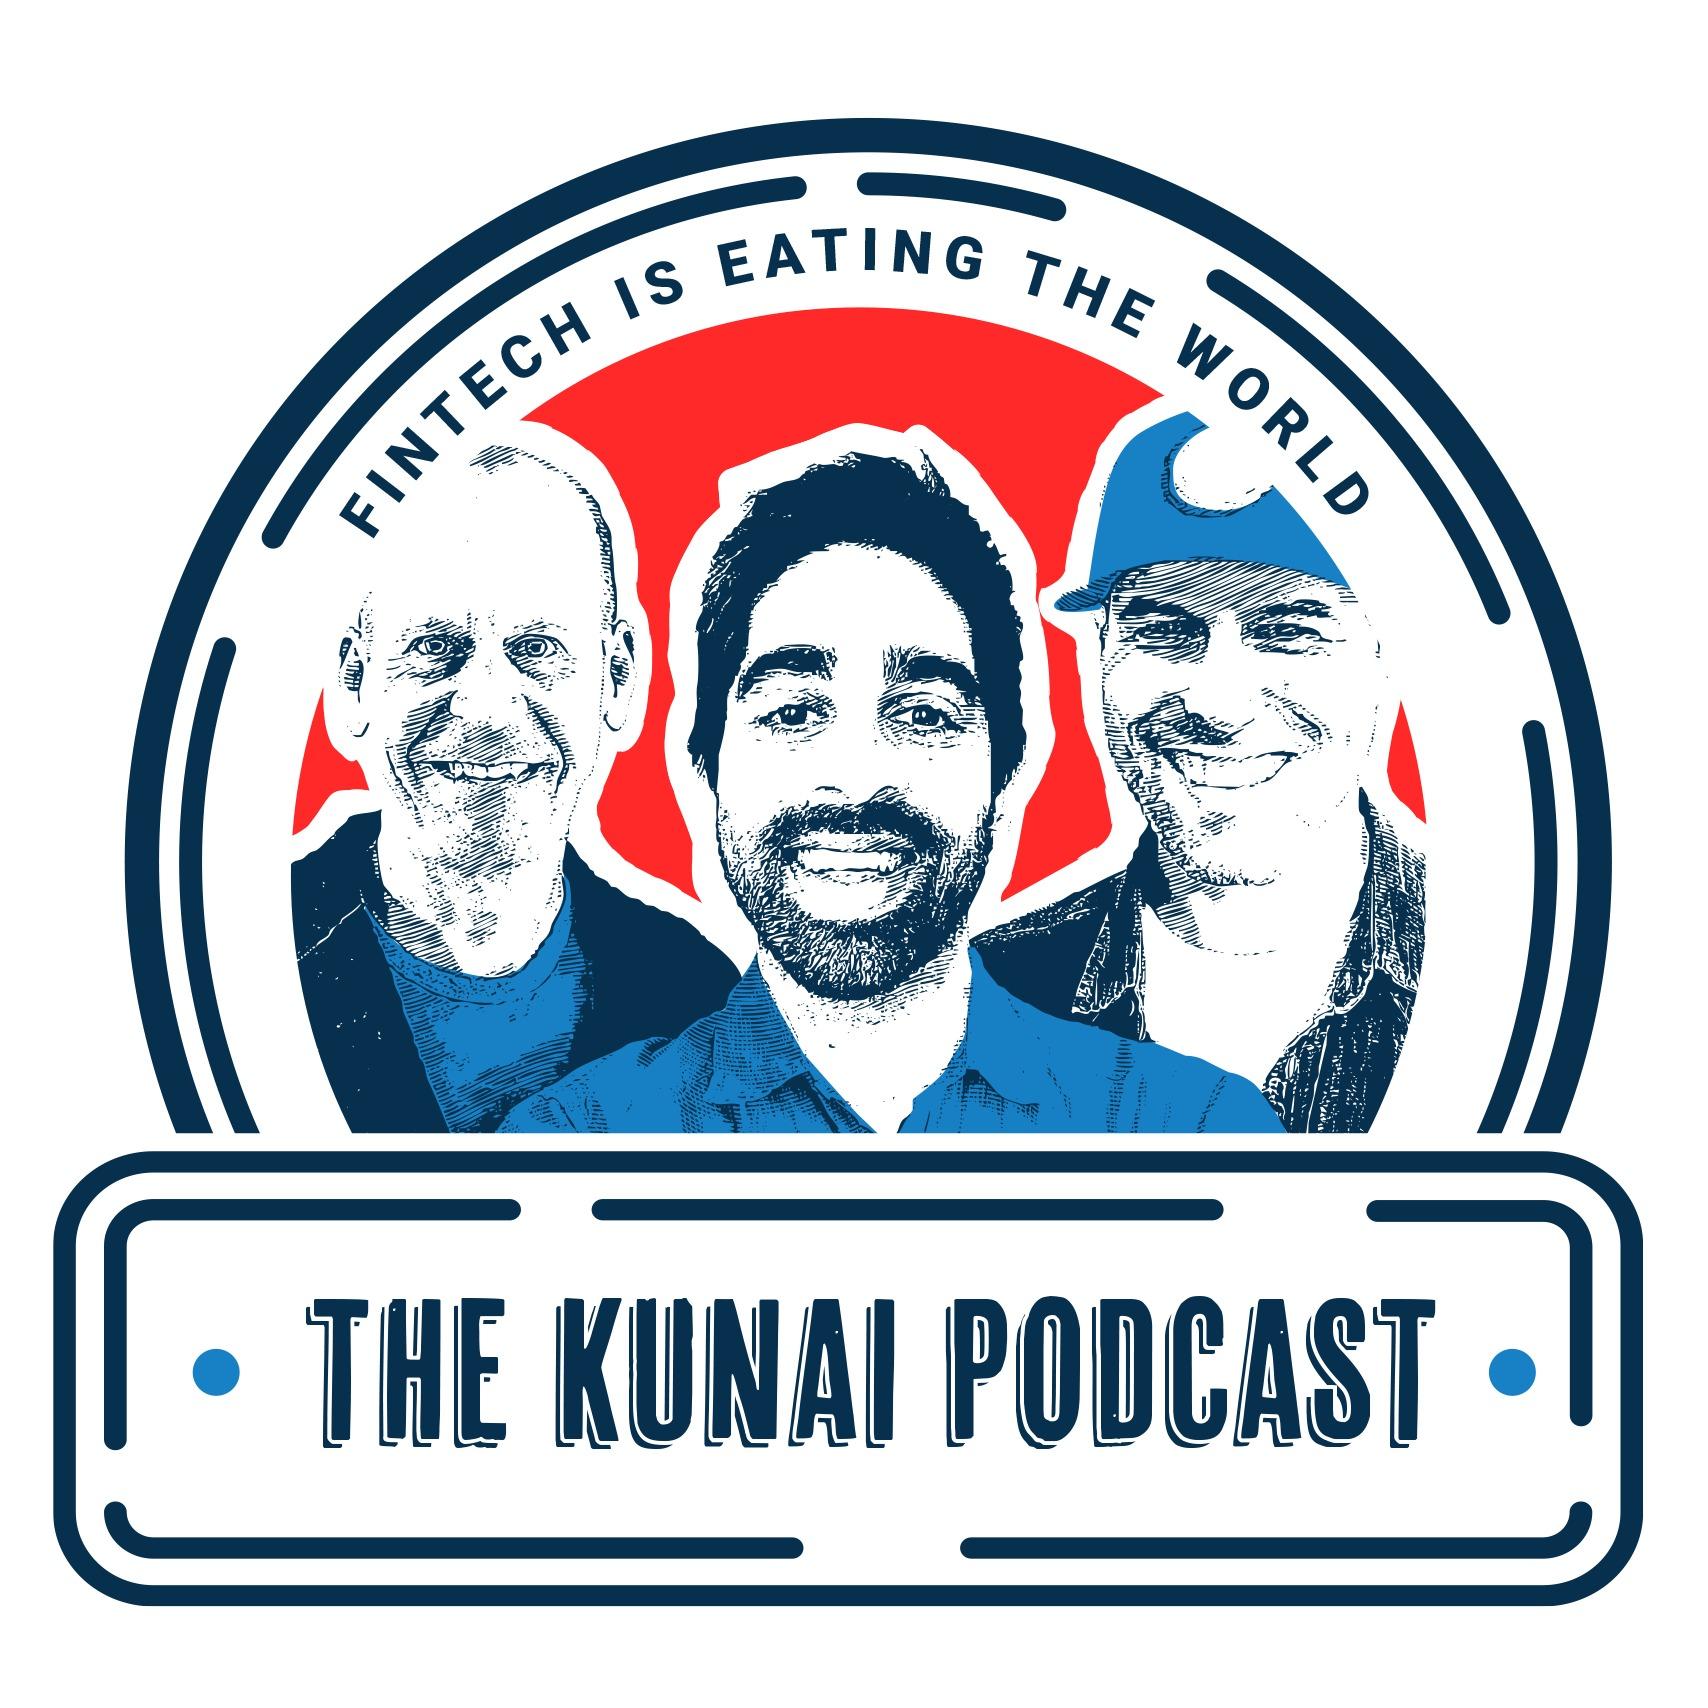 The Kunai Podcast: Fintech is Eating the World